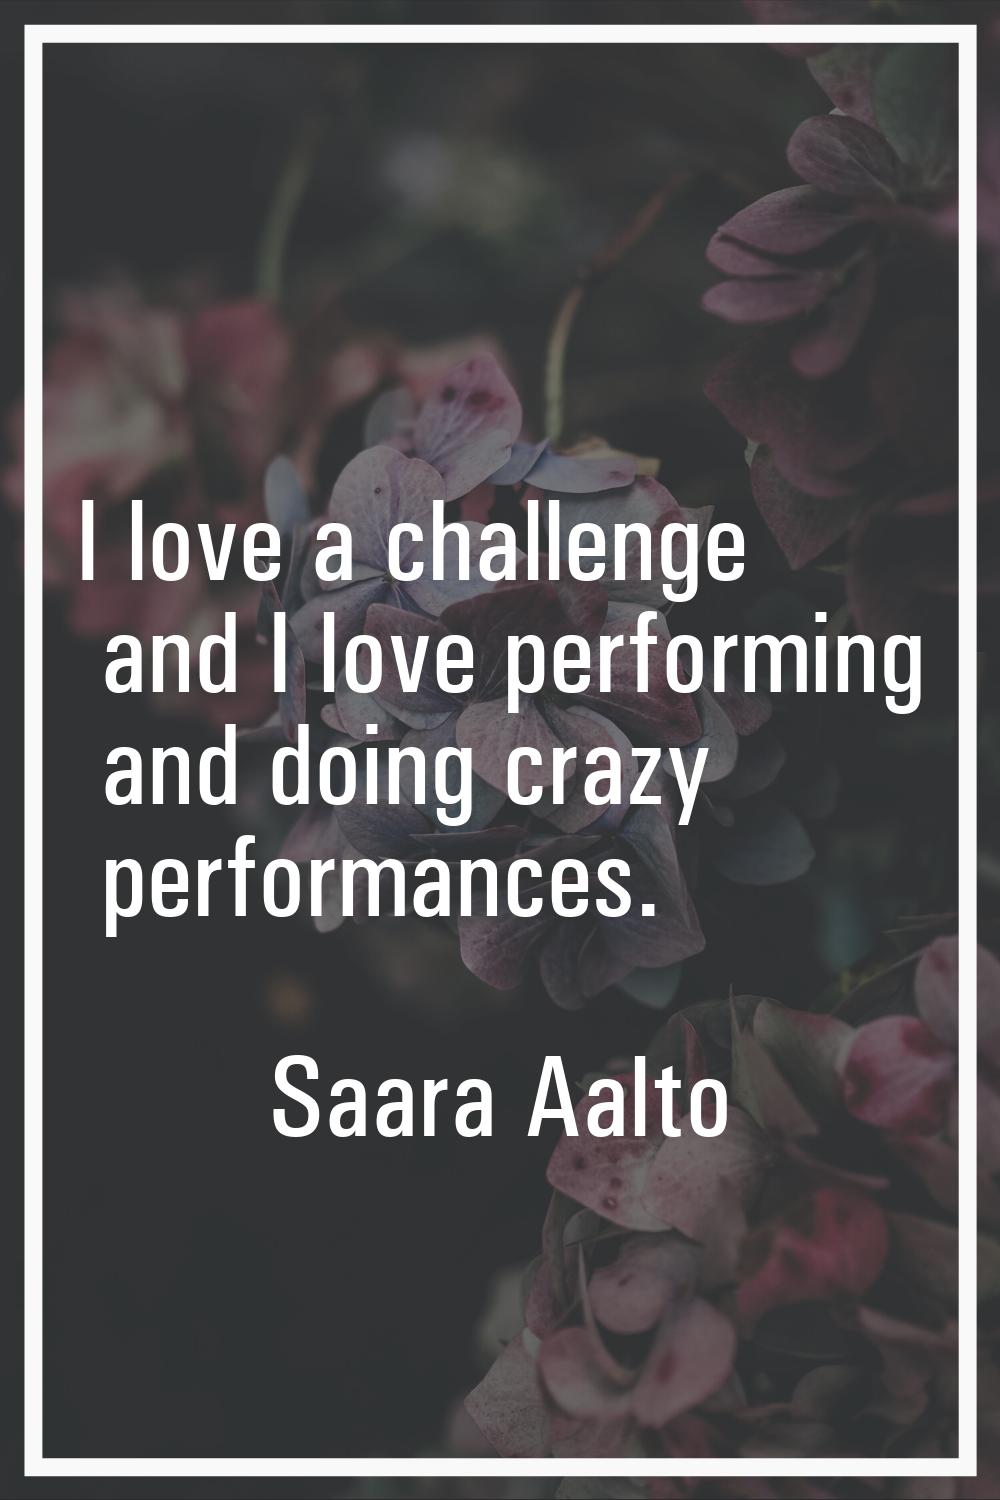 I love a challenge and I love performing and doing crazy performances.